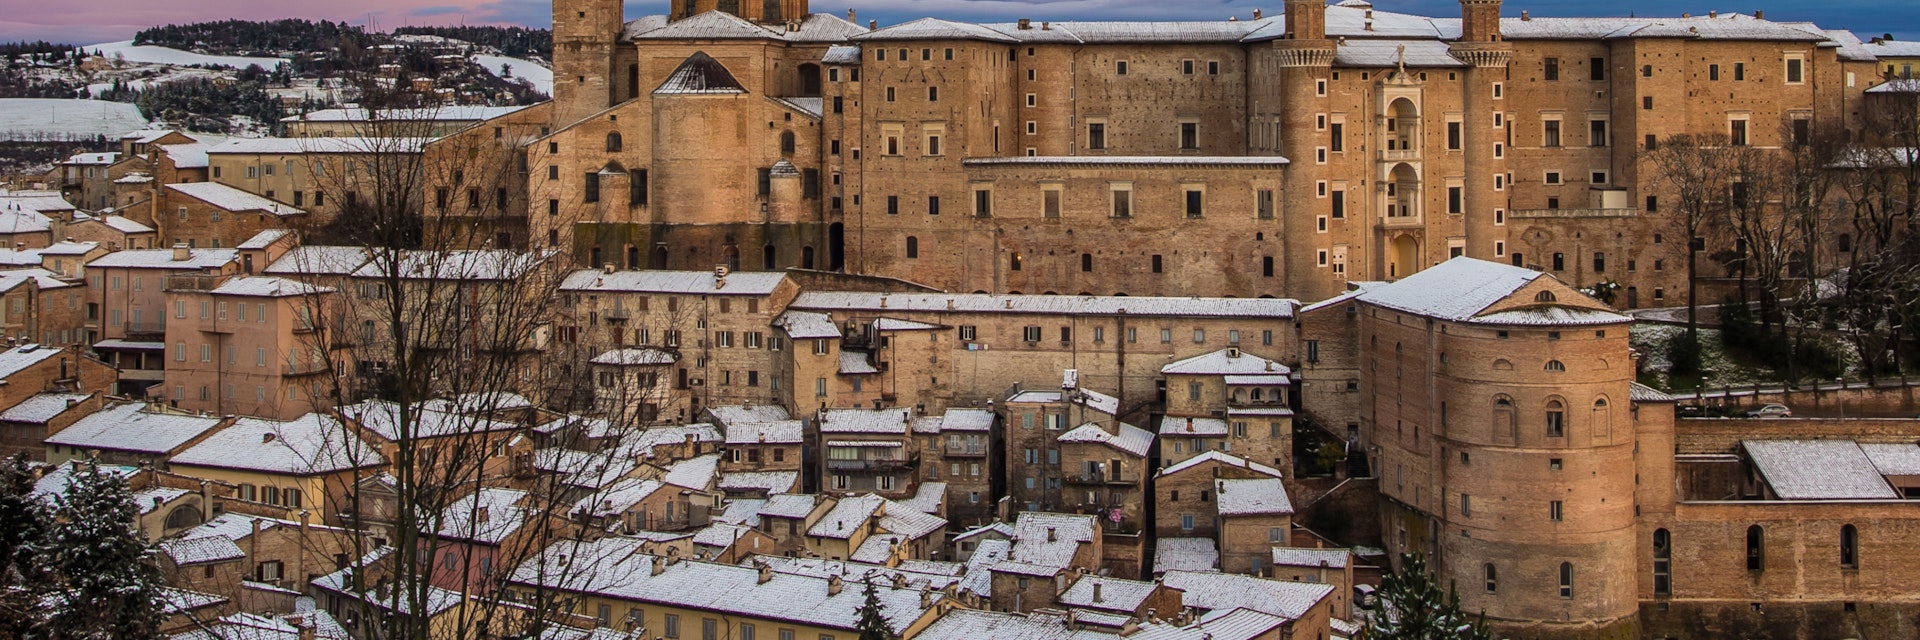 Beautiful colored sky over Urbino at sunset with snow.